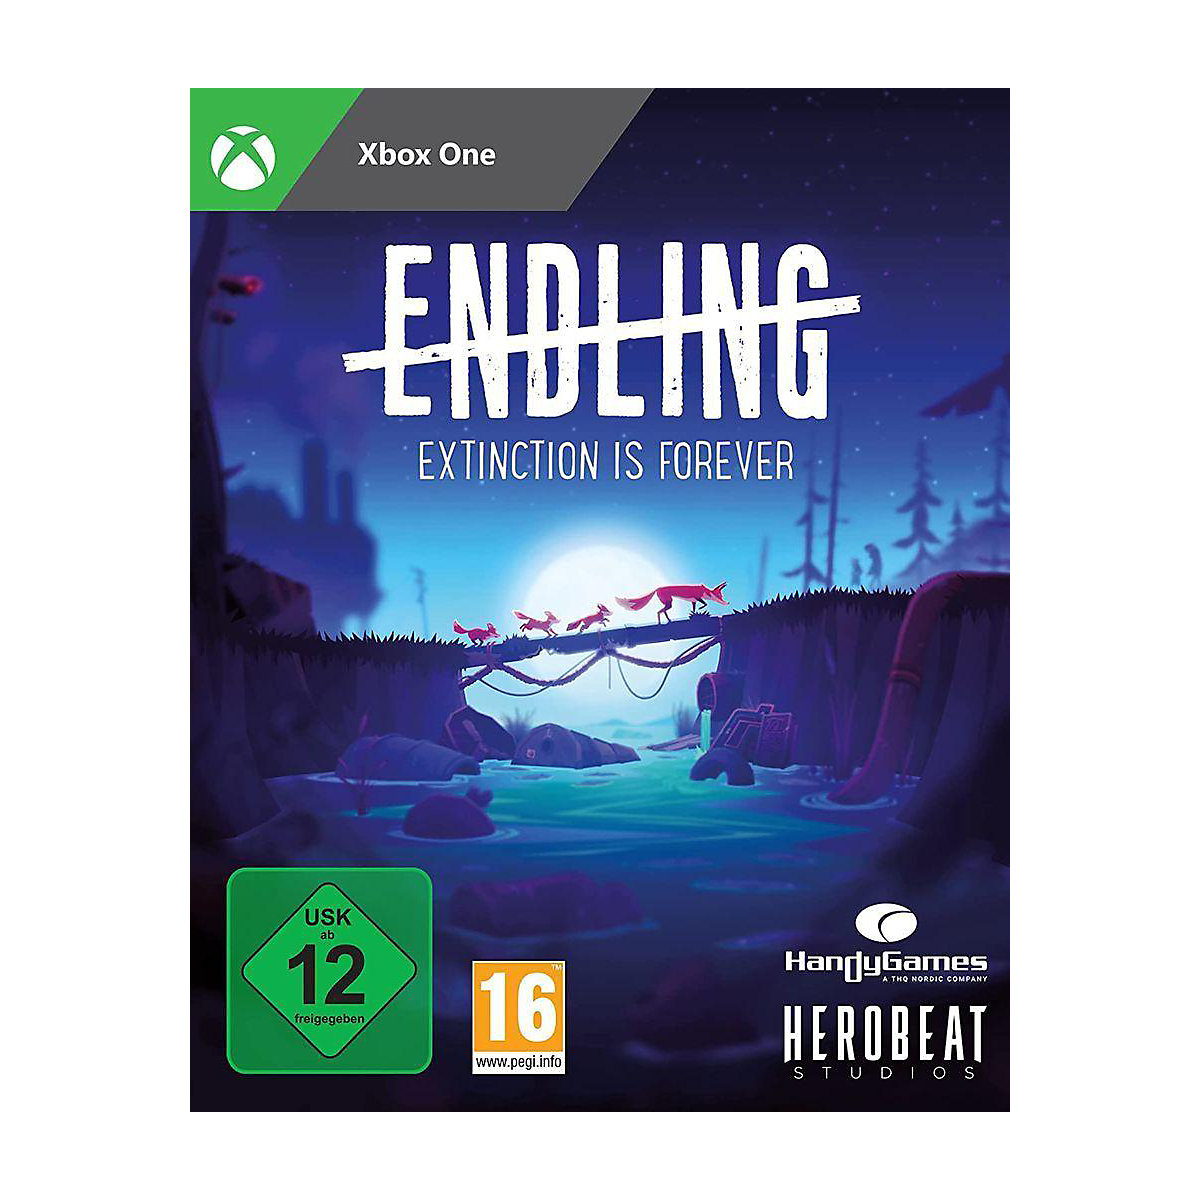 XBOX One Endling Extinction is for ever